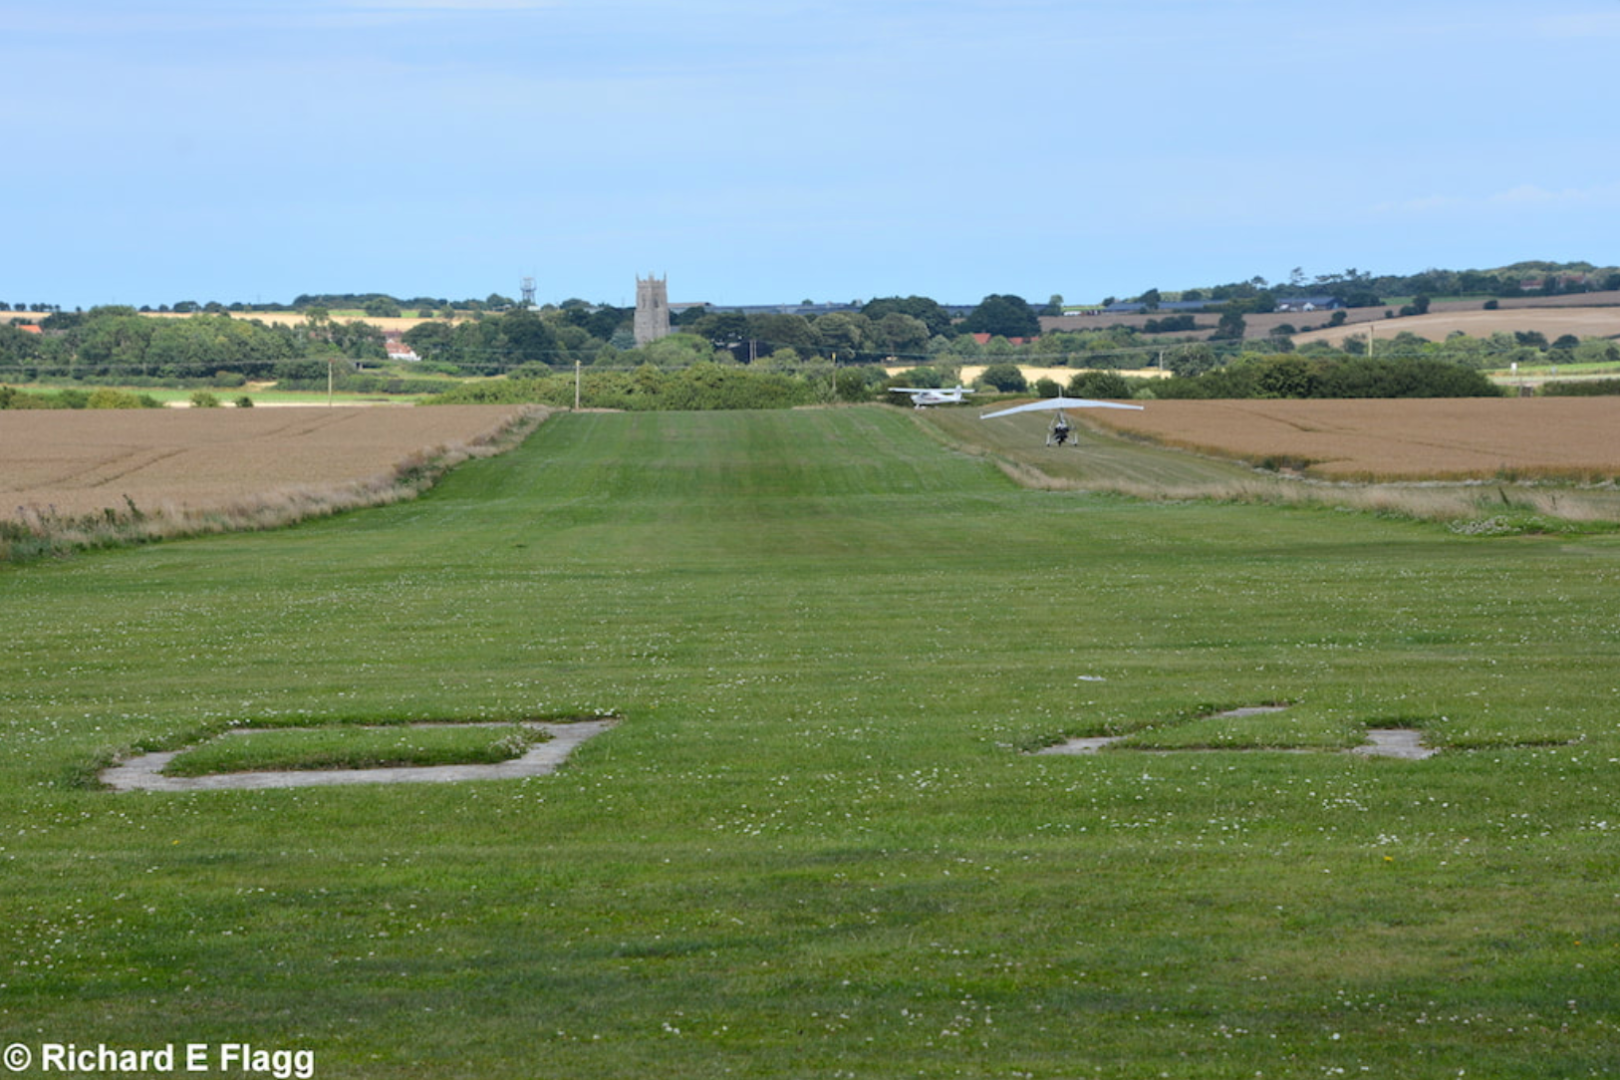 007Runway 04:22. Looking north east from the runway 04 threshold - 22 July 2017.png